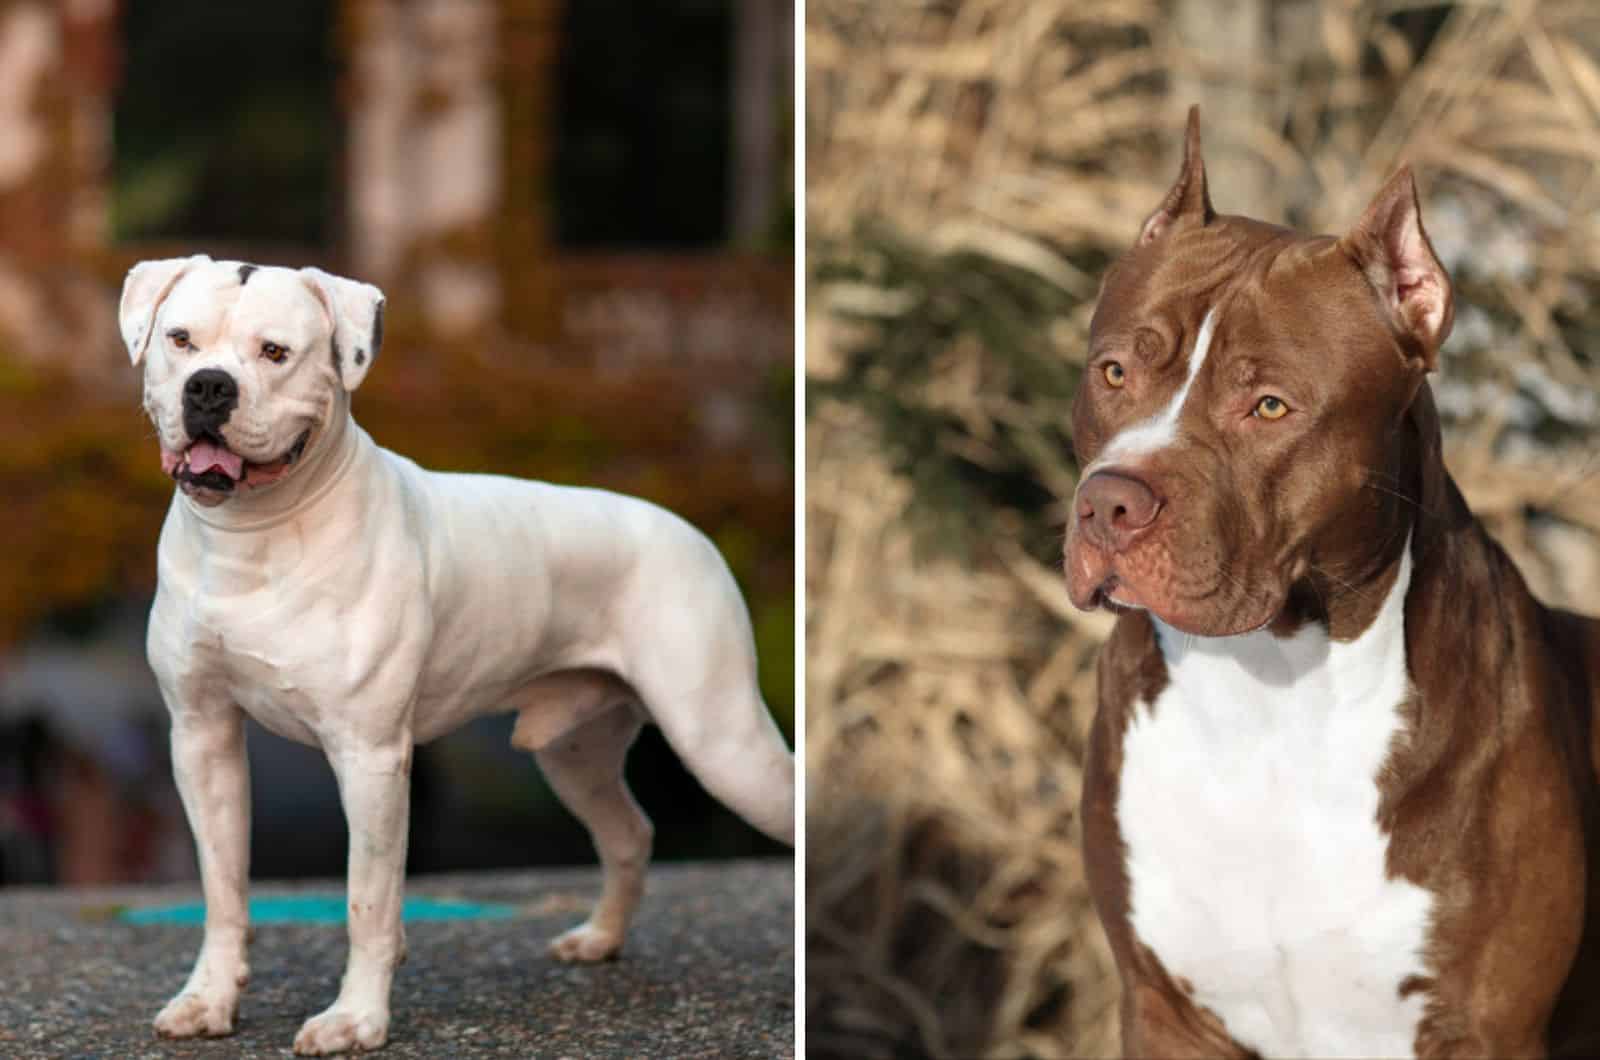 American Bulldog Vs Pitbull Terrier Which One Is The Better Dog Breed For You